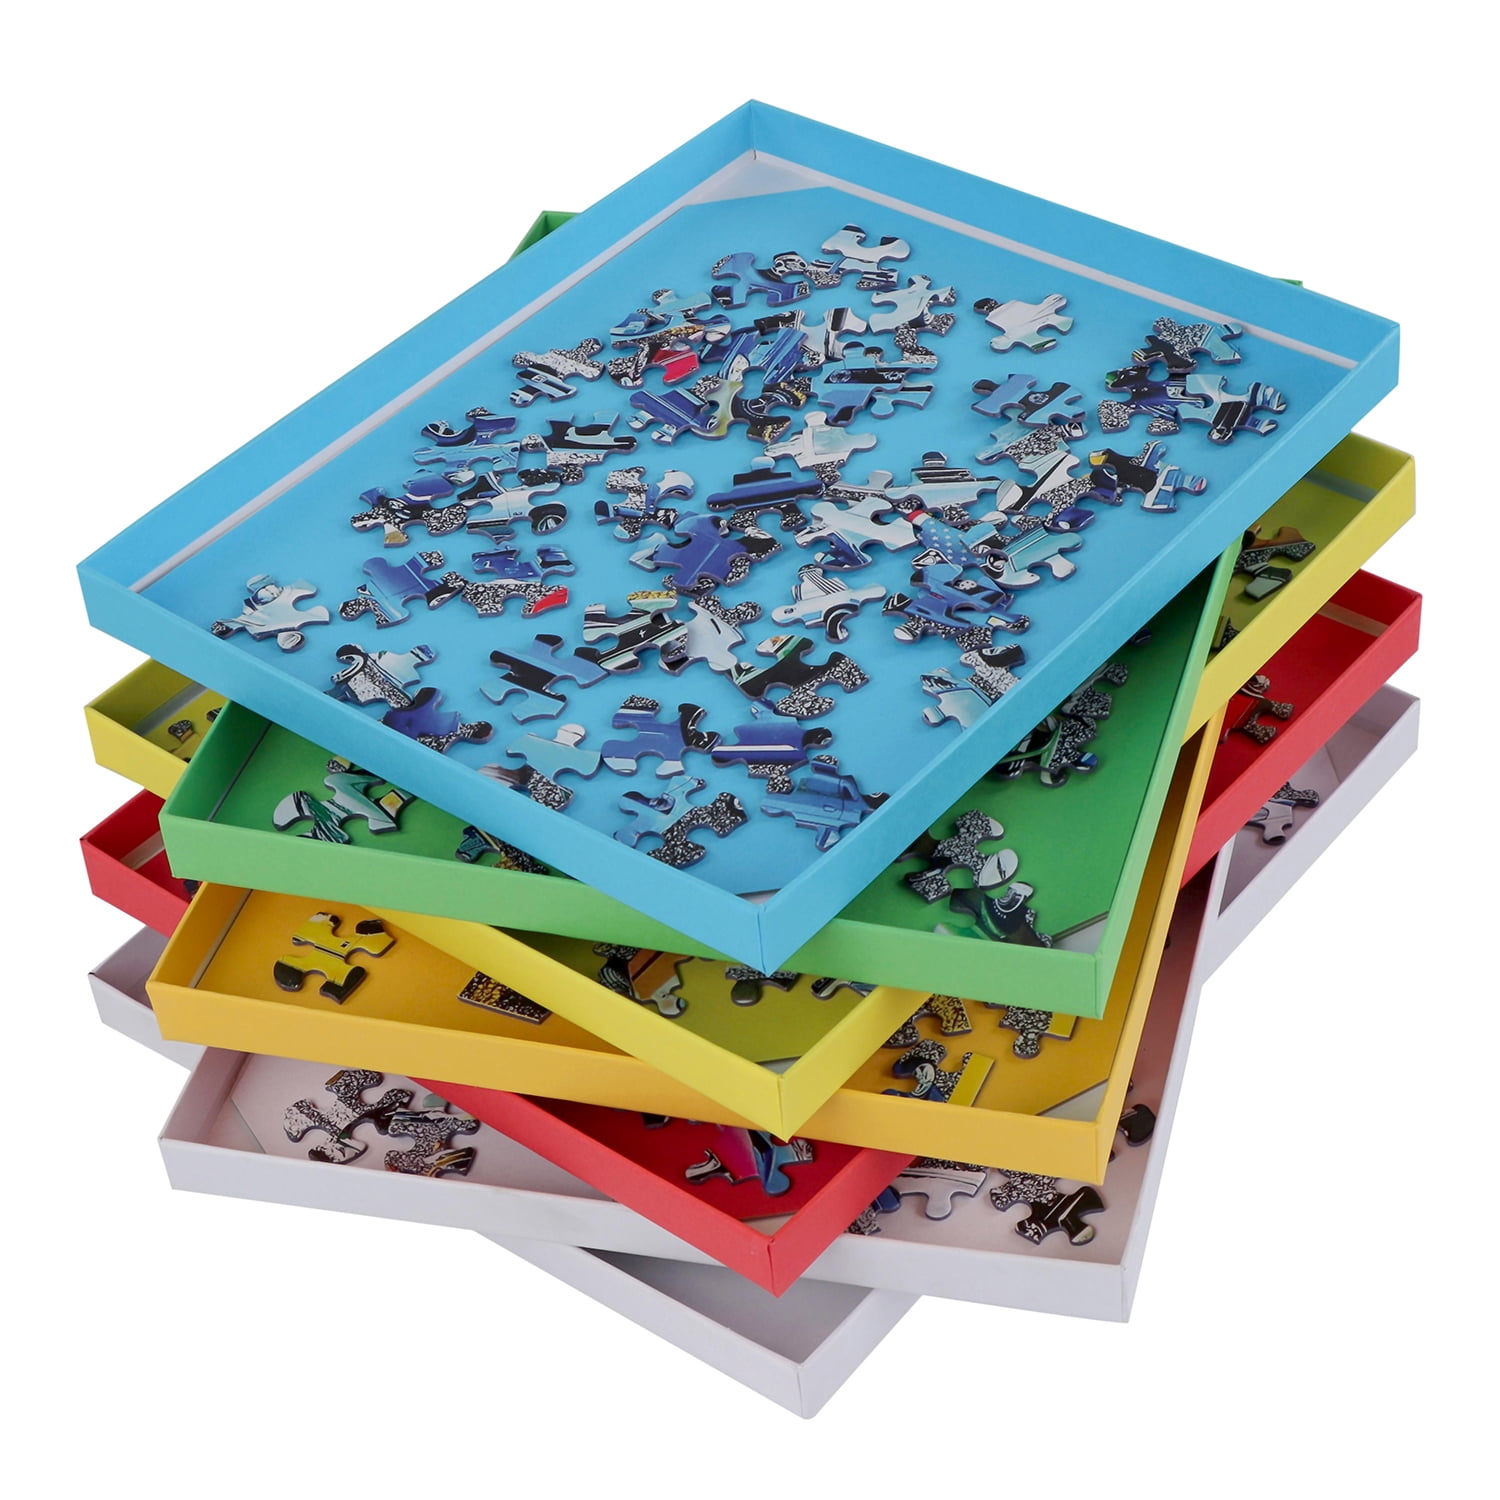  Bits and Pieces - 1000 Piece Size Porta-Puzzle Jigsaw Caddy -  Puzzle Accessories - Puzzle Table - 22½ X 31½ : Toys & Games